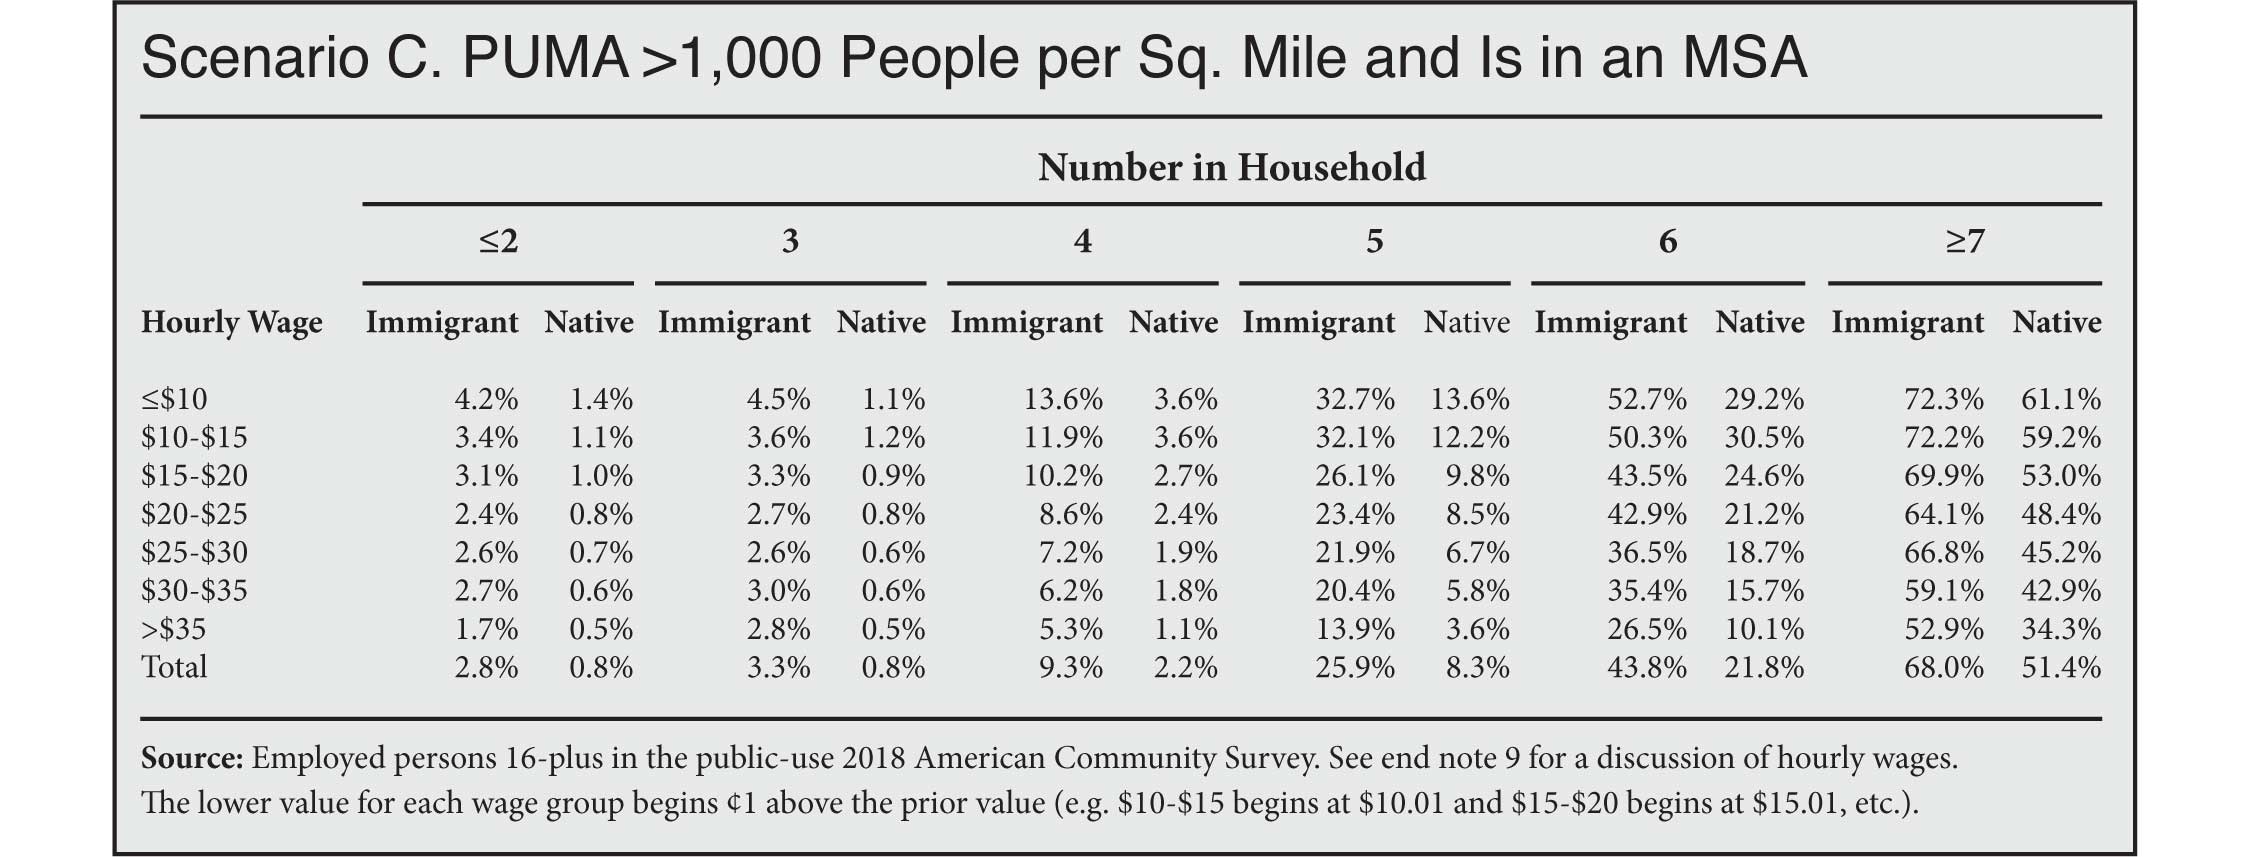 Table: Overcrowding for Immigrant & Native-Born Workers Ages 25 & Older by Wage, Household Size, & Population Density, PUMA >1000 People per square mile and is in a MSA